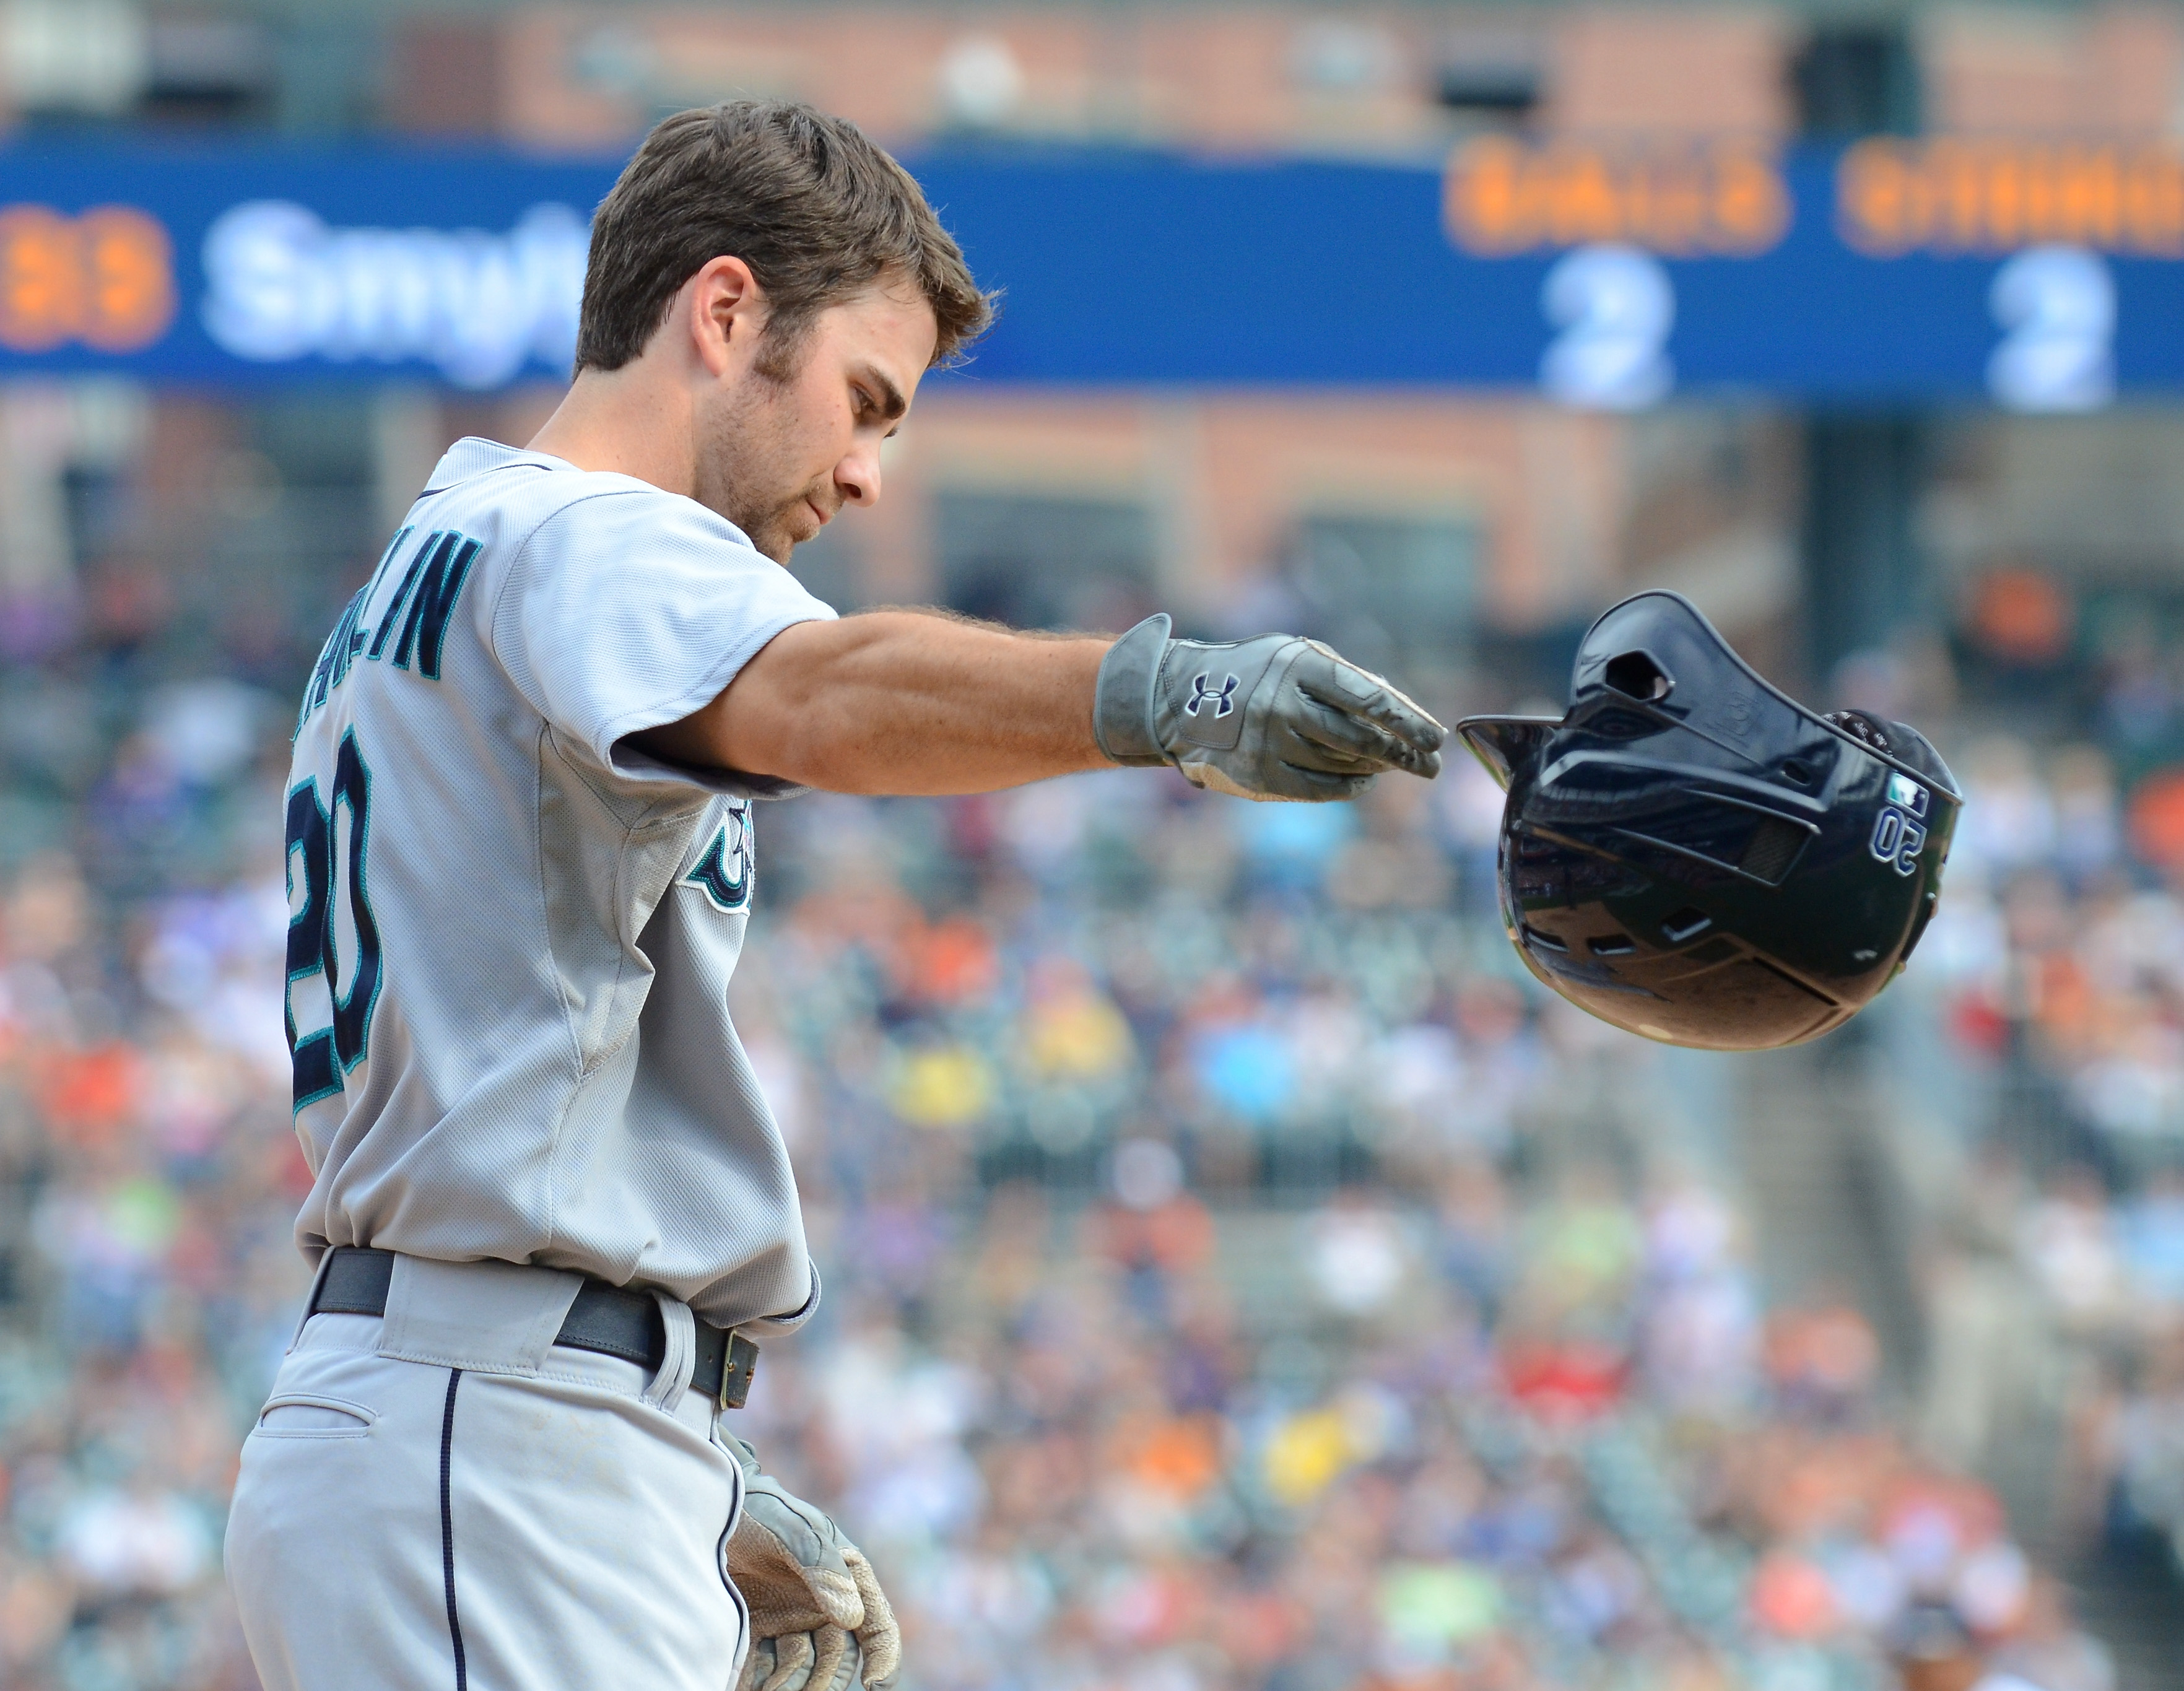 Seattle Mariners v Detroit Tigers